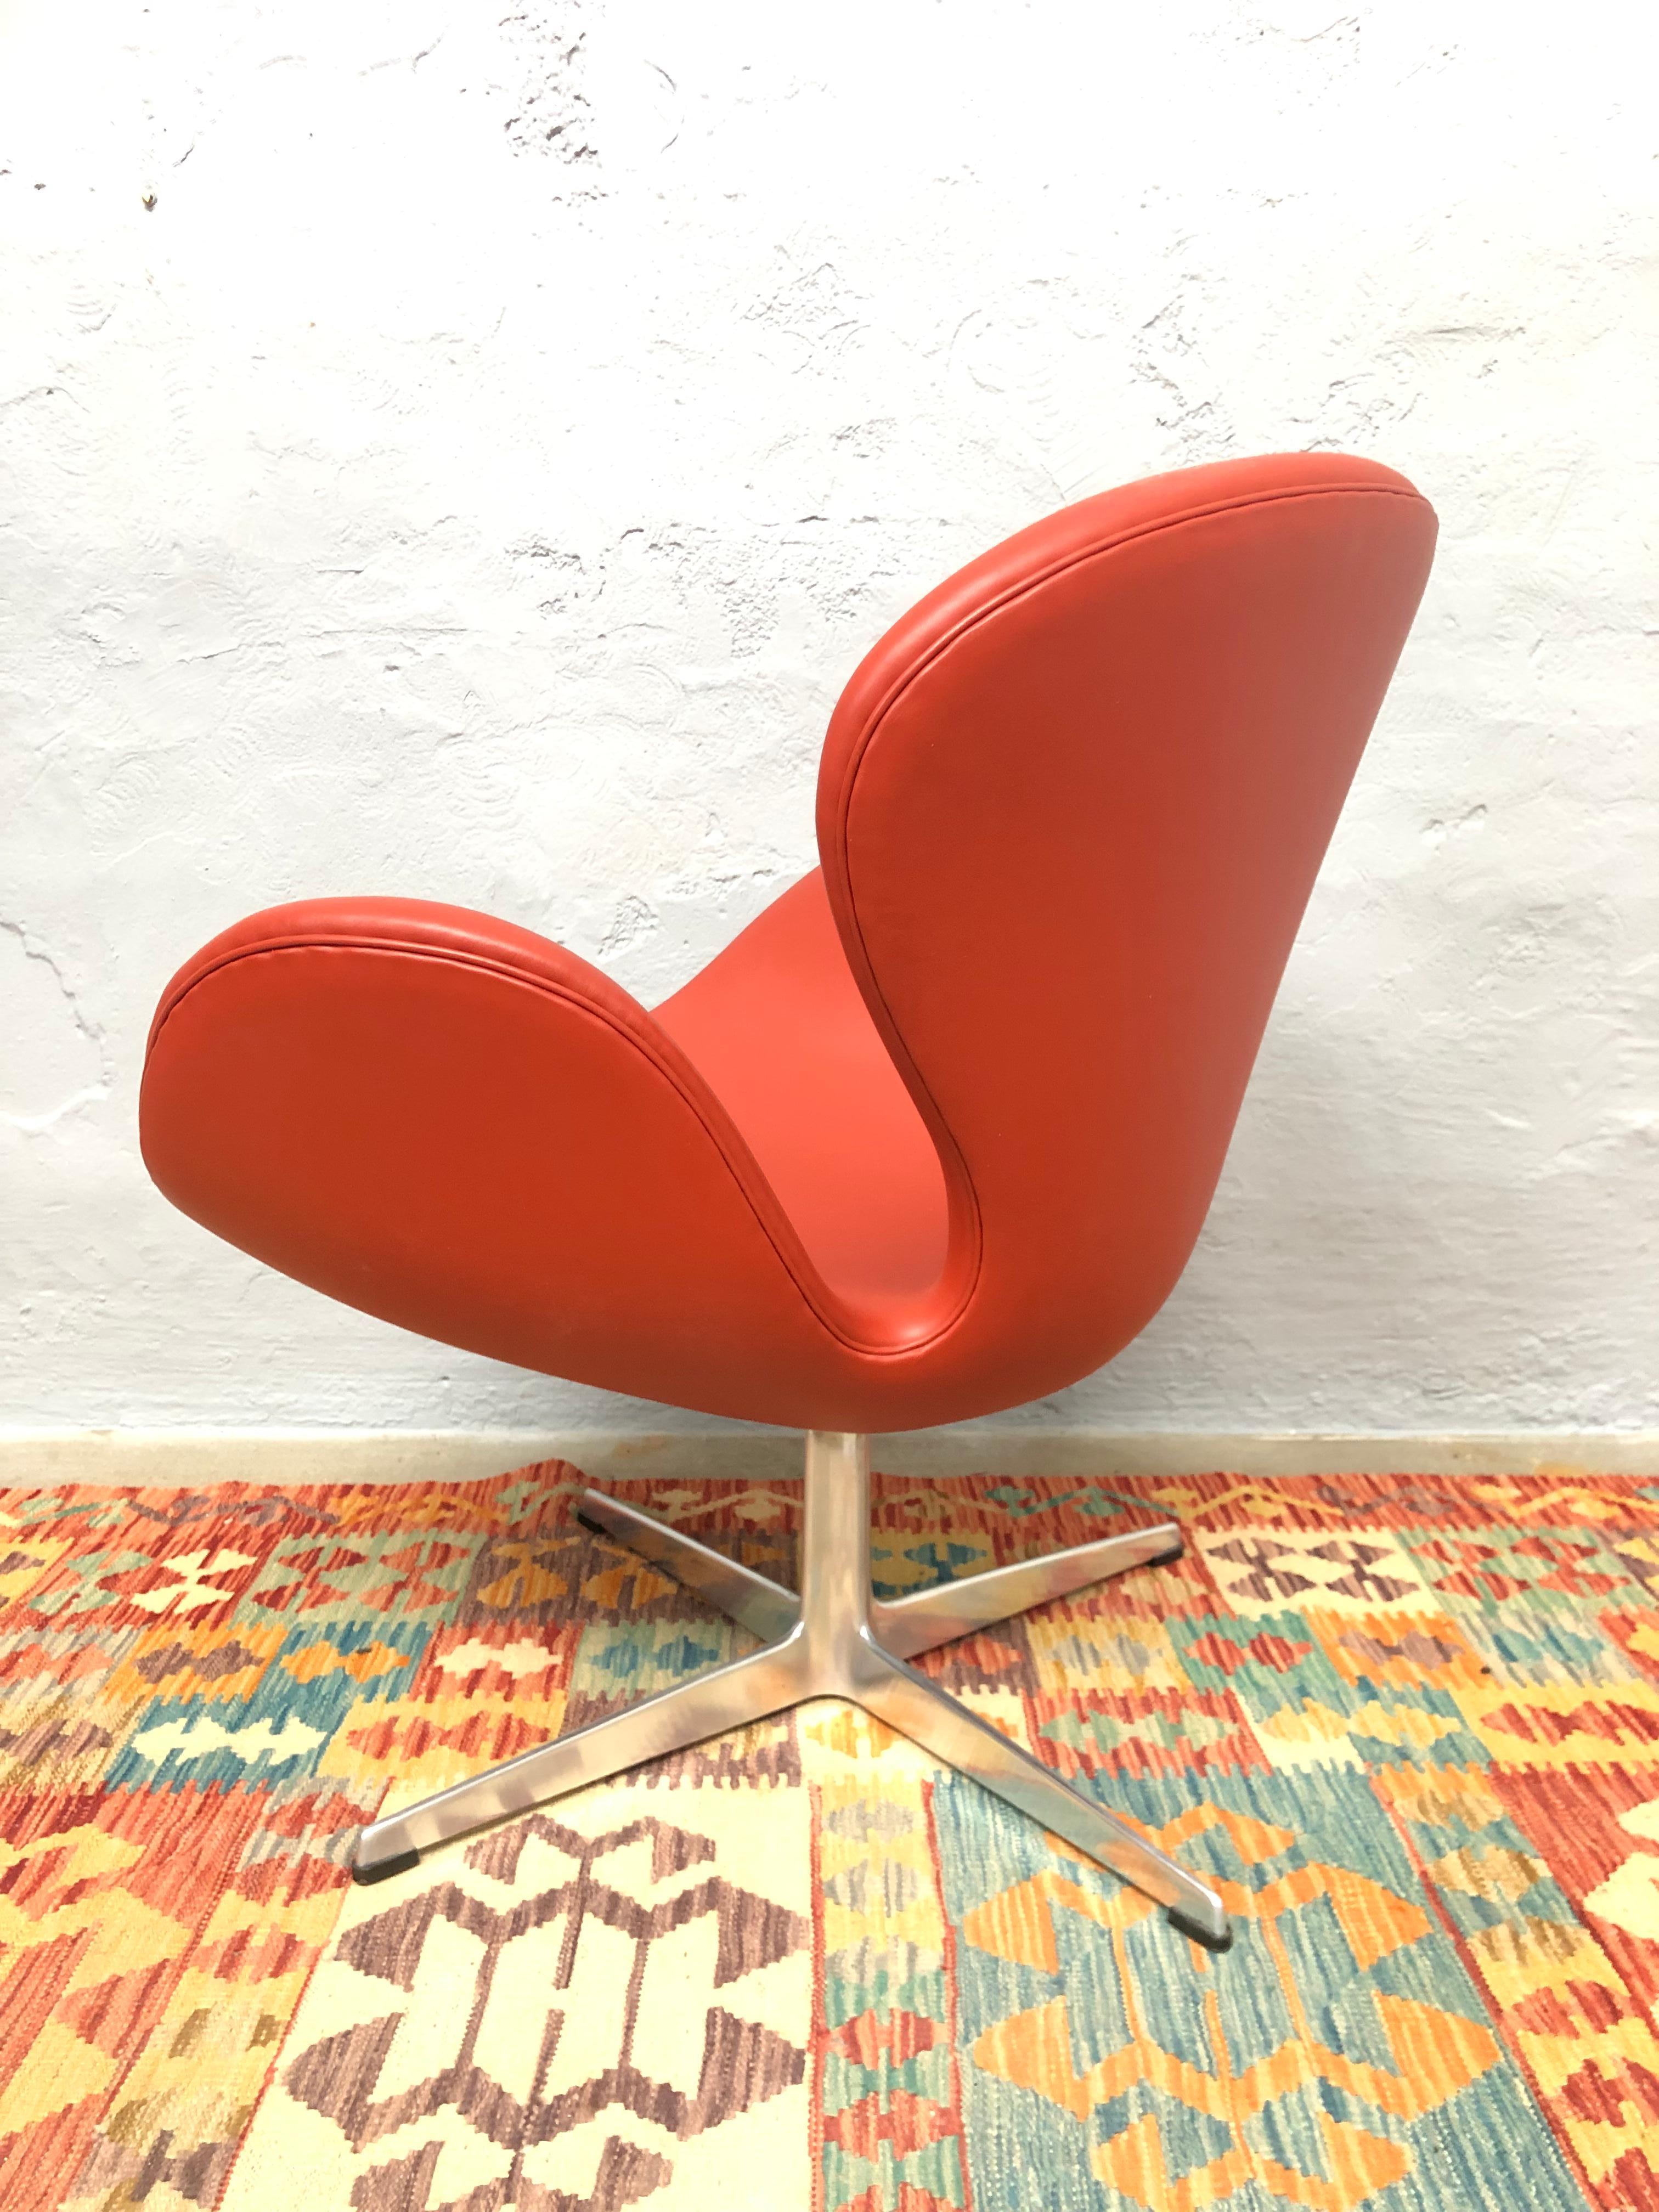 Vintage Iconic First Edition Arne Jacobsen 3320 Lounge Chair Designed in 1958 2